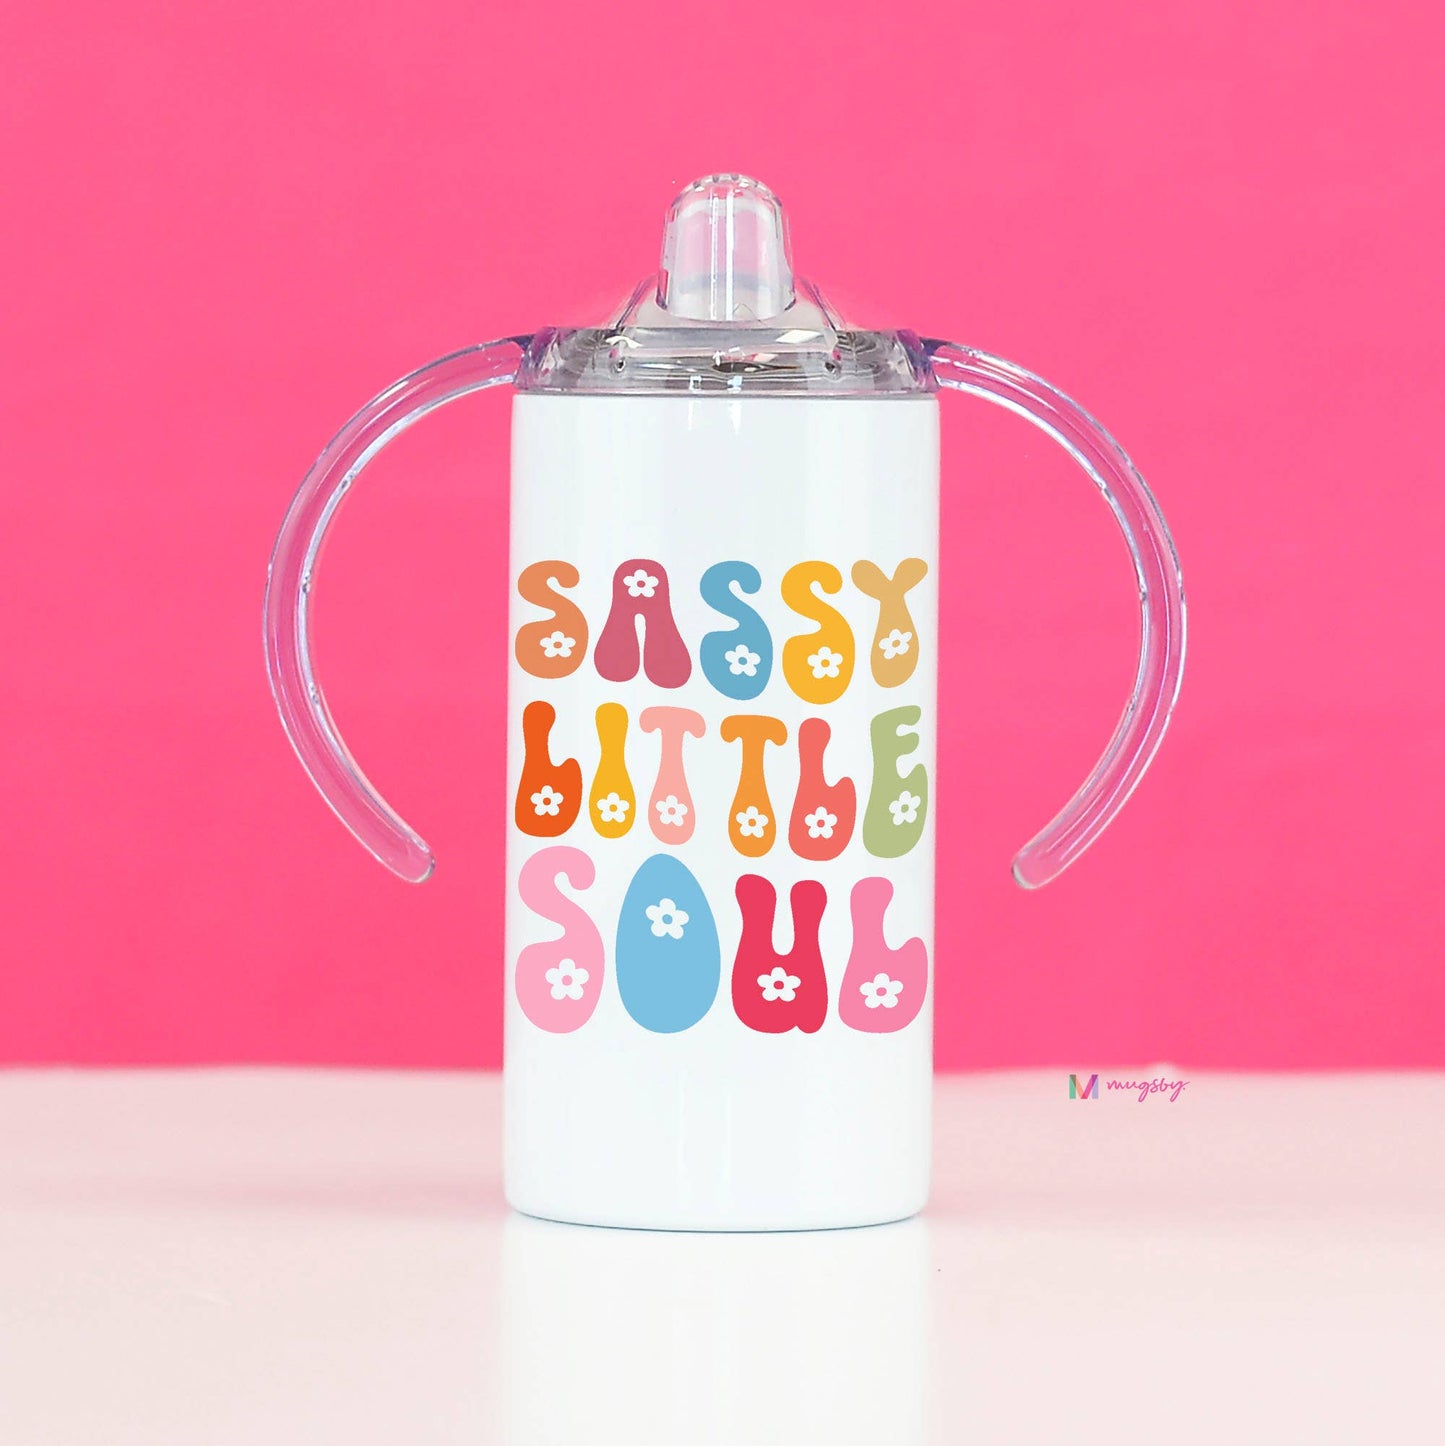 Sassy Little Soul Kid Stainless Steel Short Travel Cup